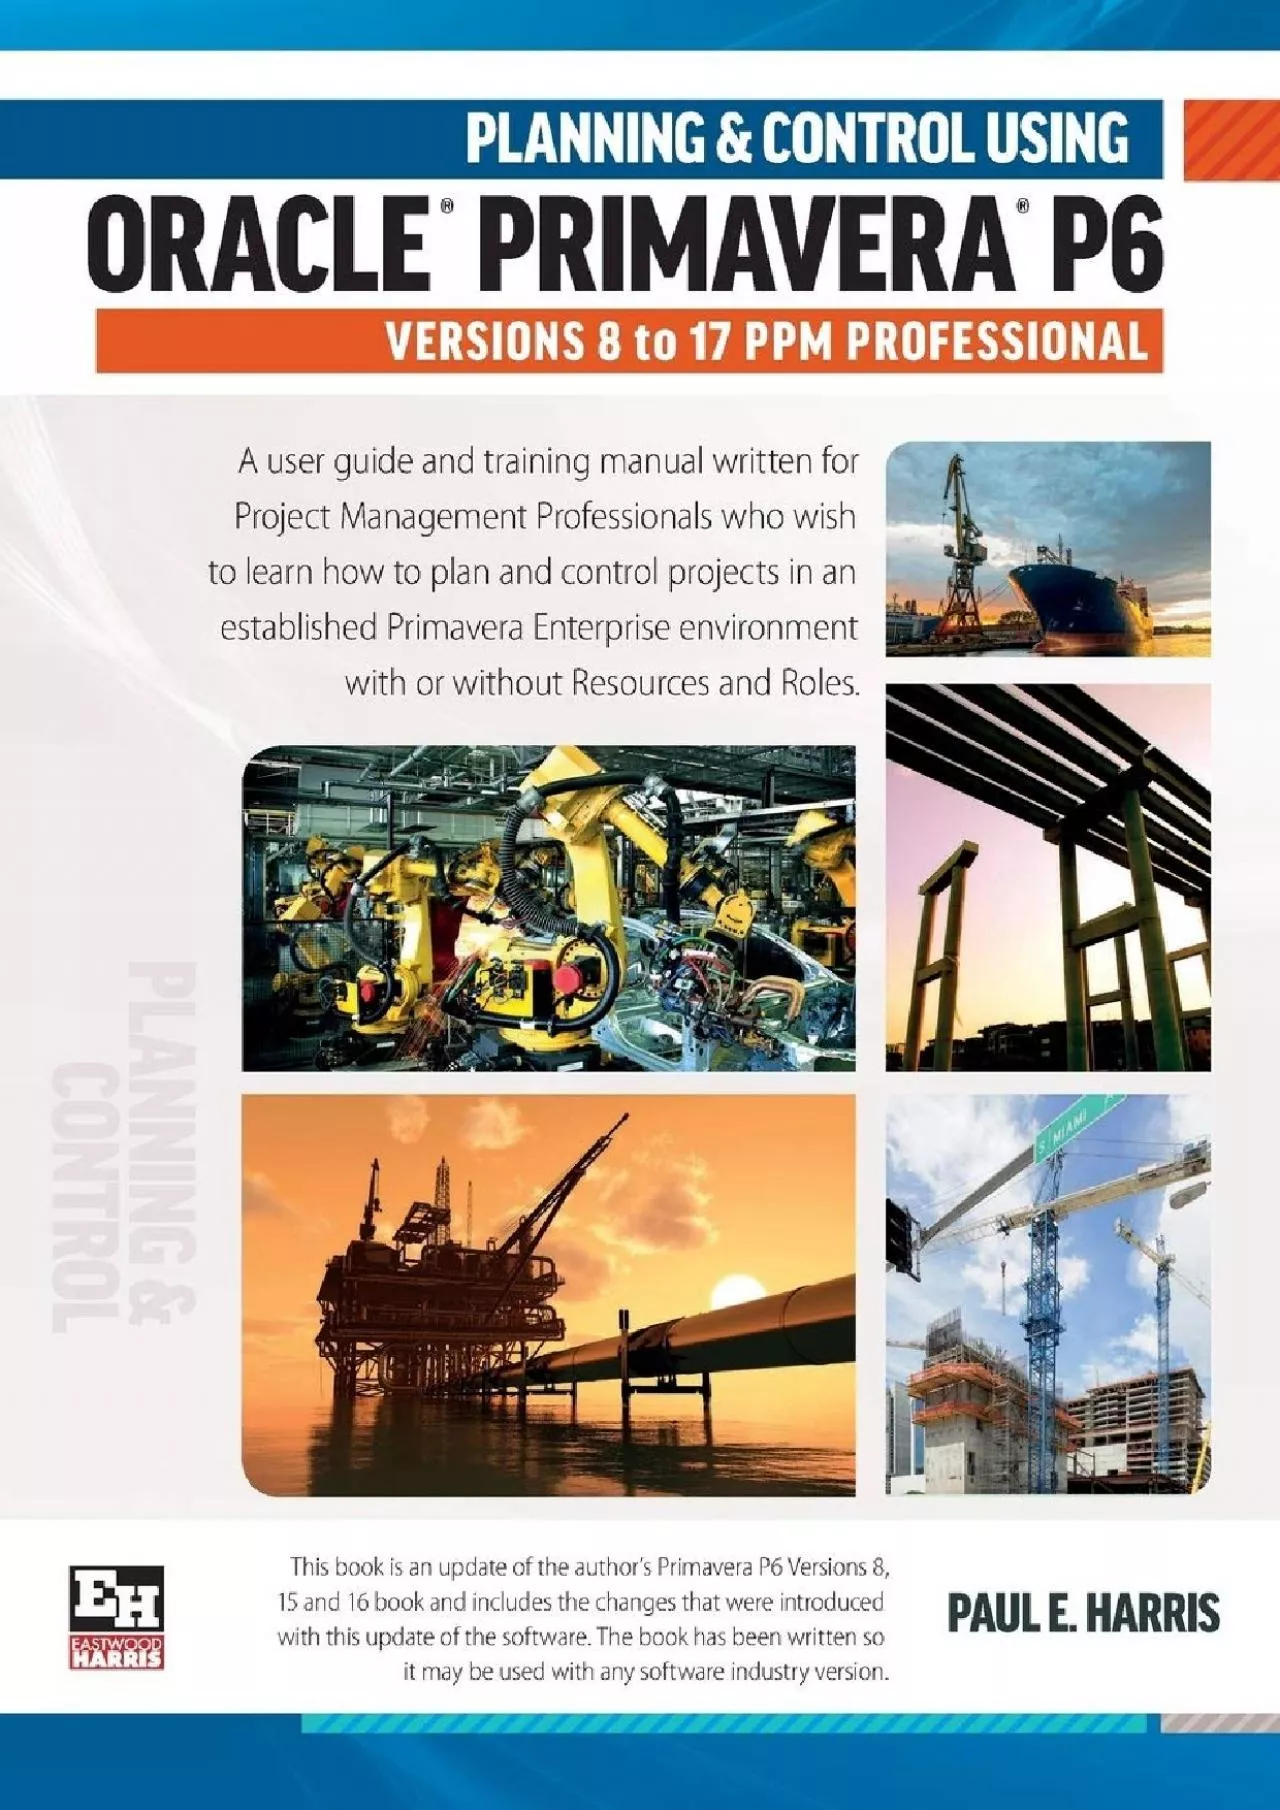 Planning and Control Using Oracle Primavera P6 Versions 8 to 17 PPM Professional